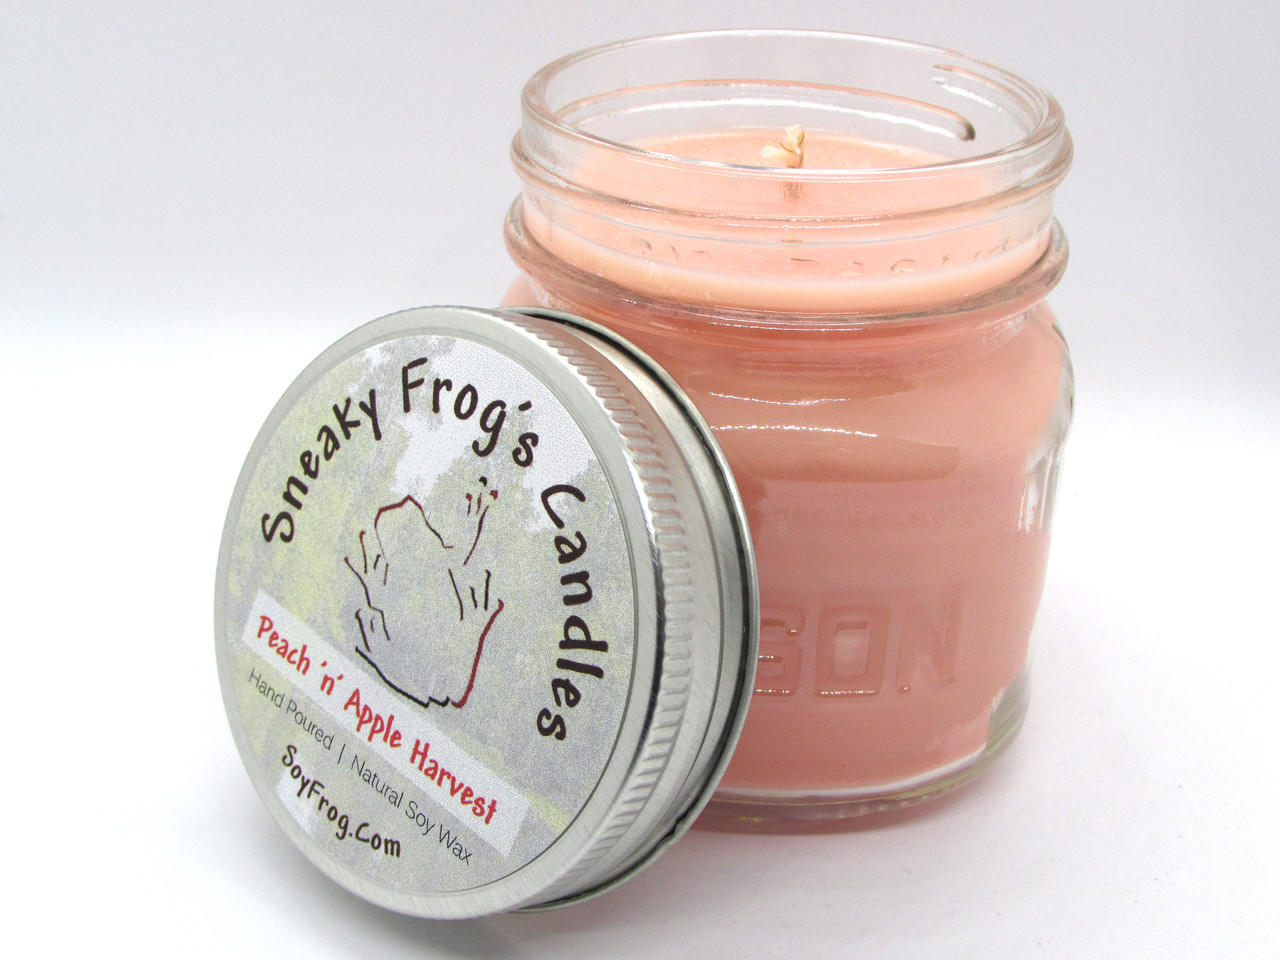 Peach 'n' Apple Harvest - Scented Natural Soy Wax Candle - 8 Oz Mason Jar